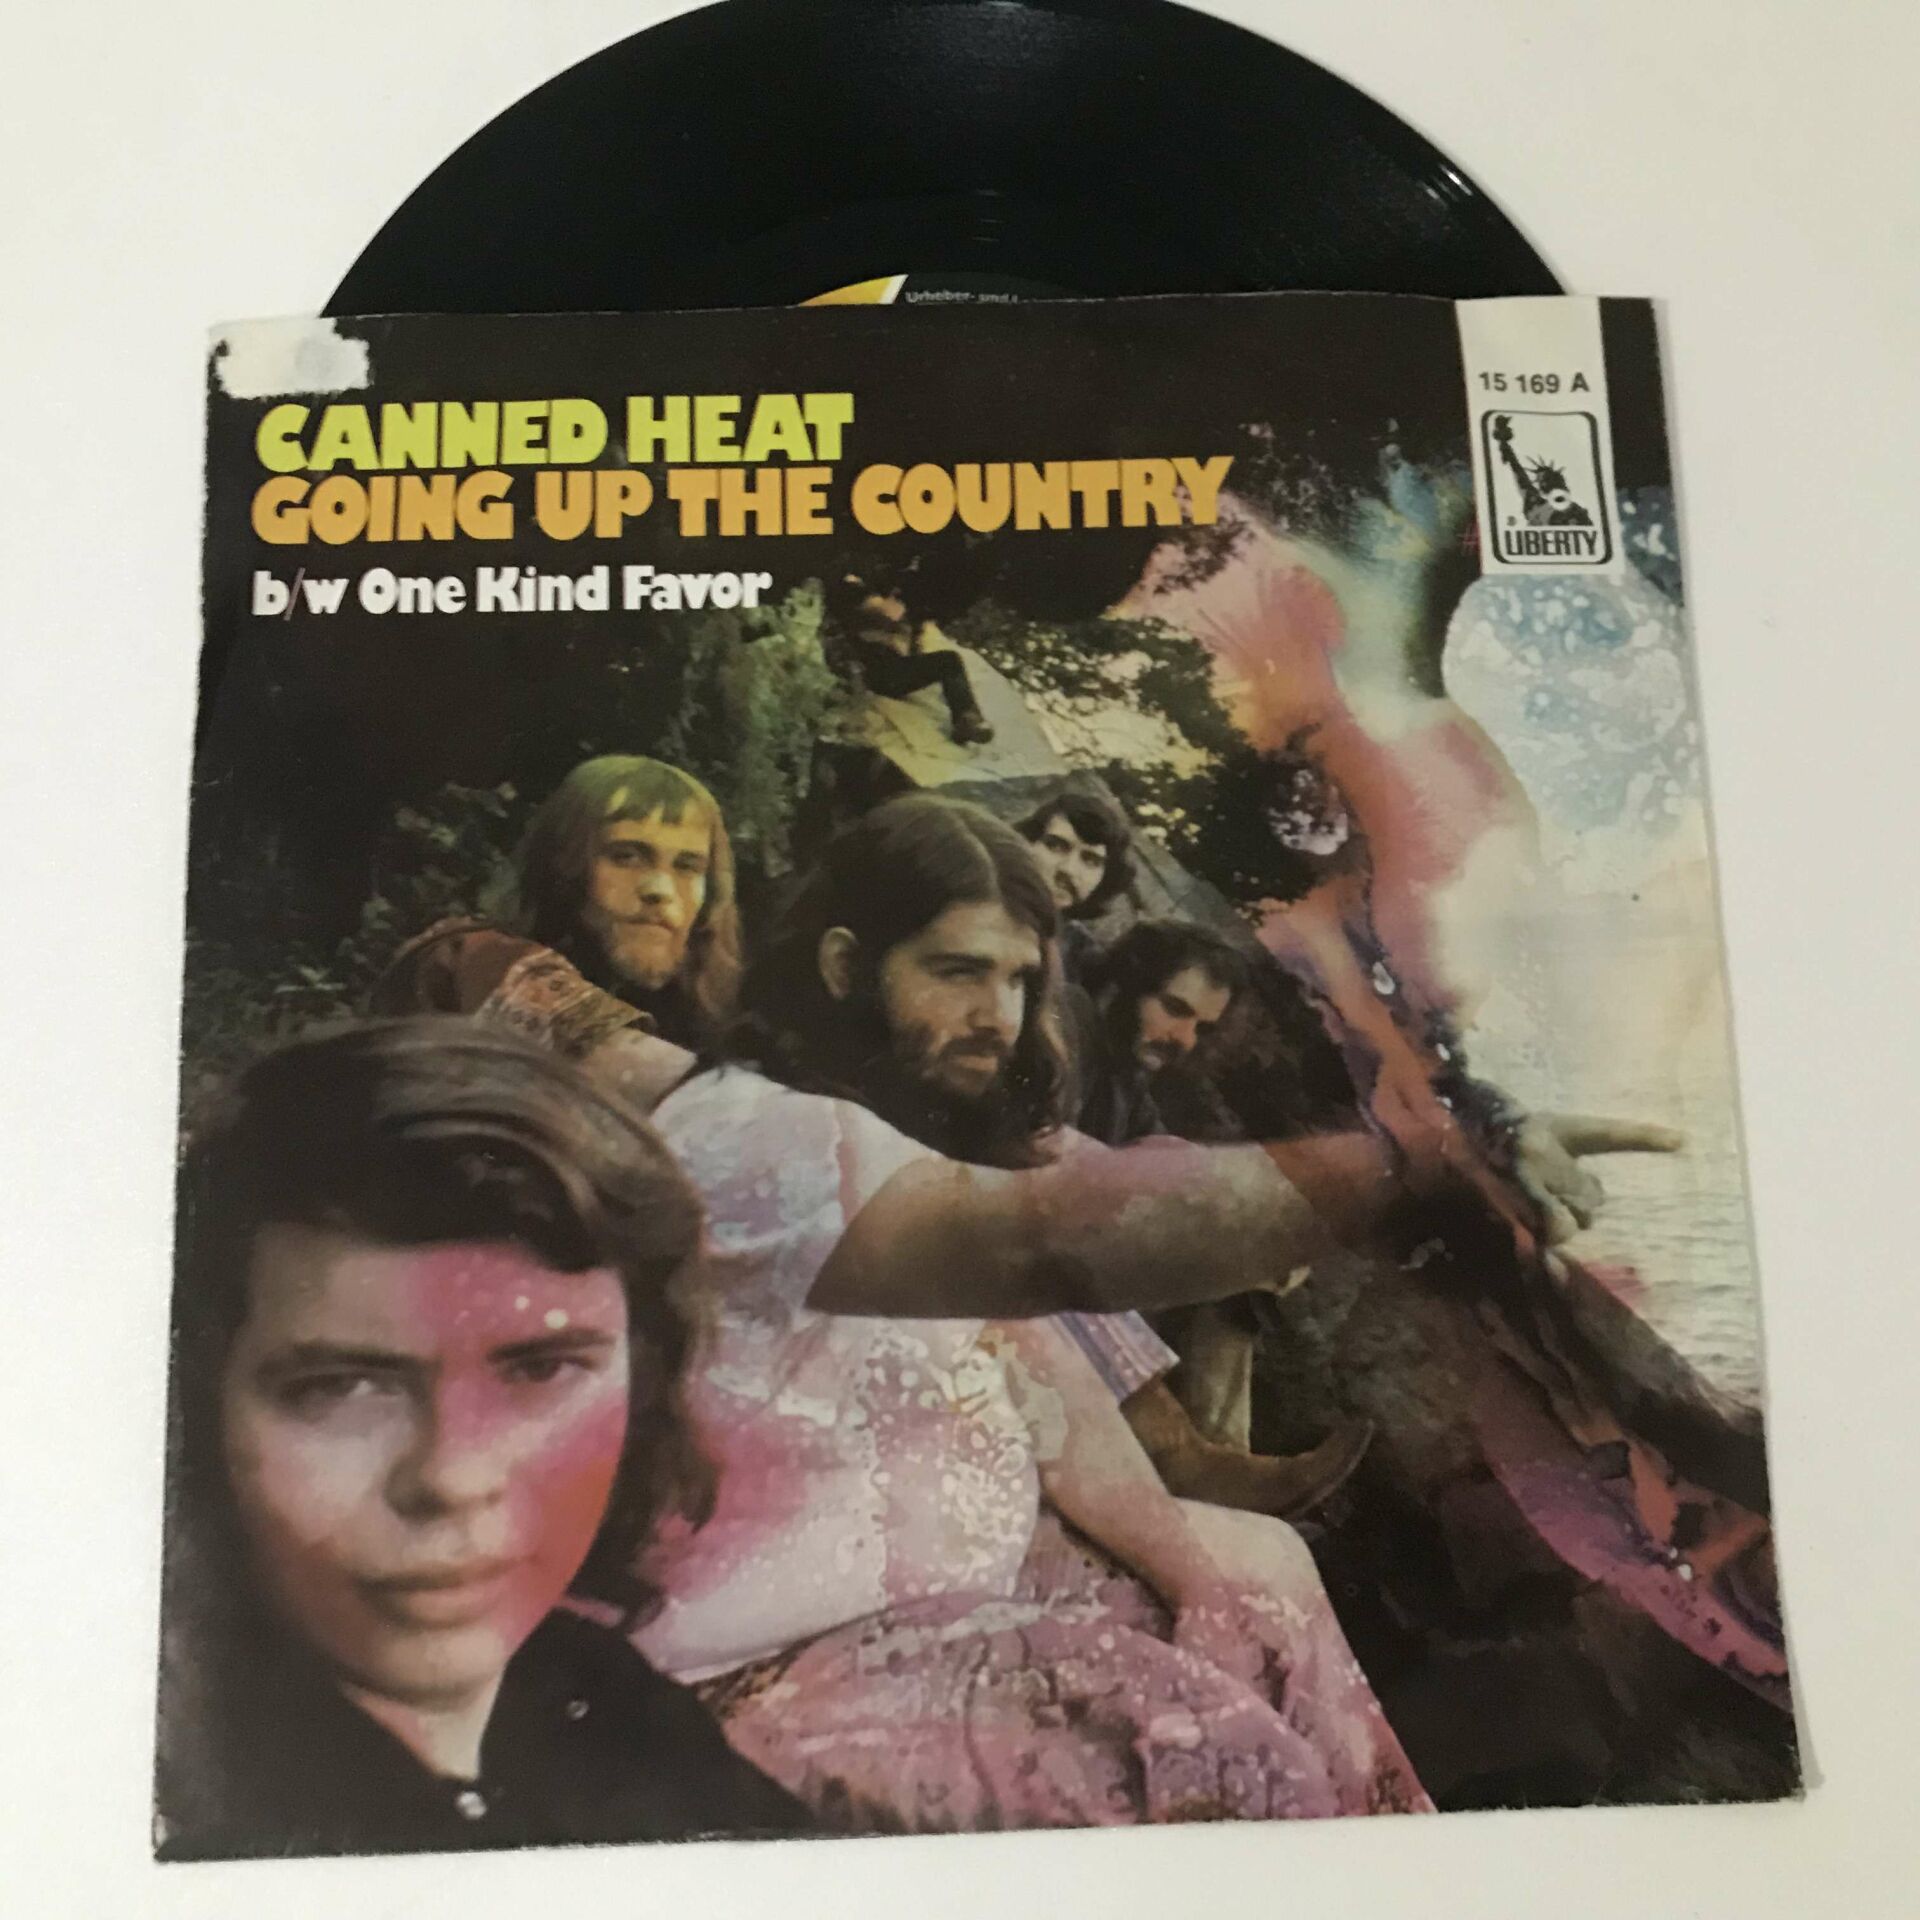 Canned Heat – Going Up The Country b/w One Kind Favor